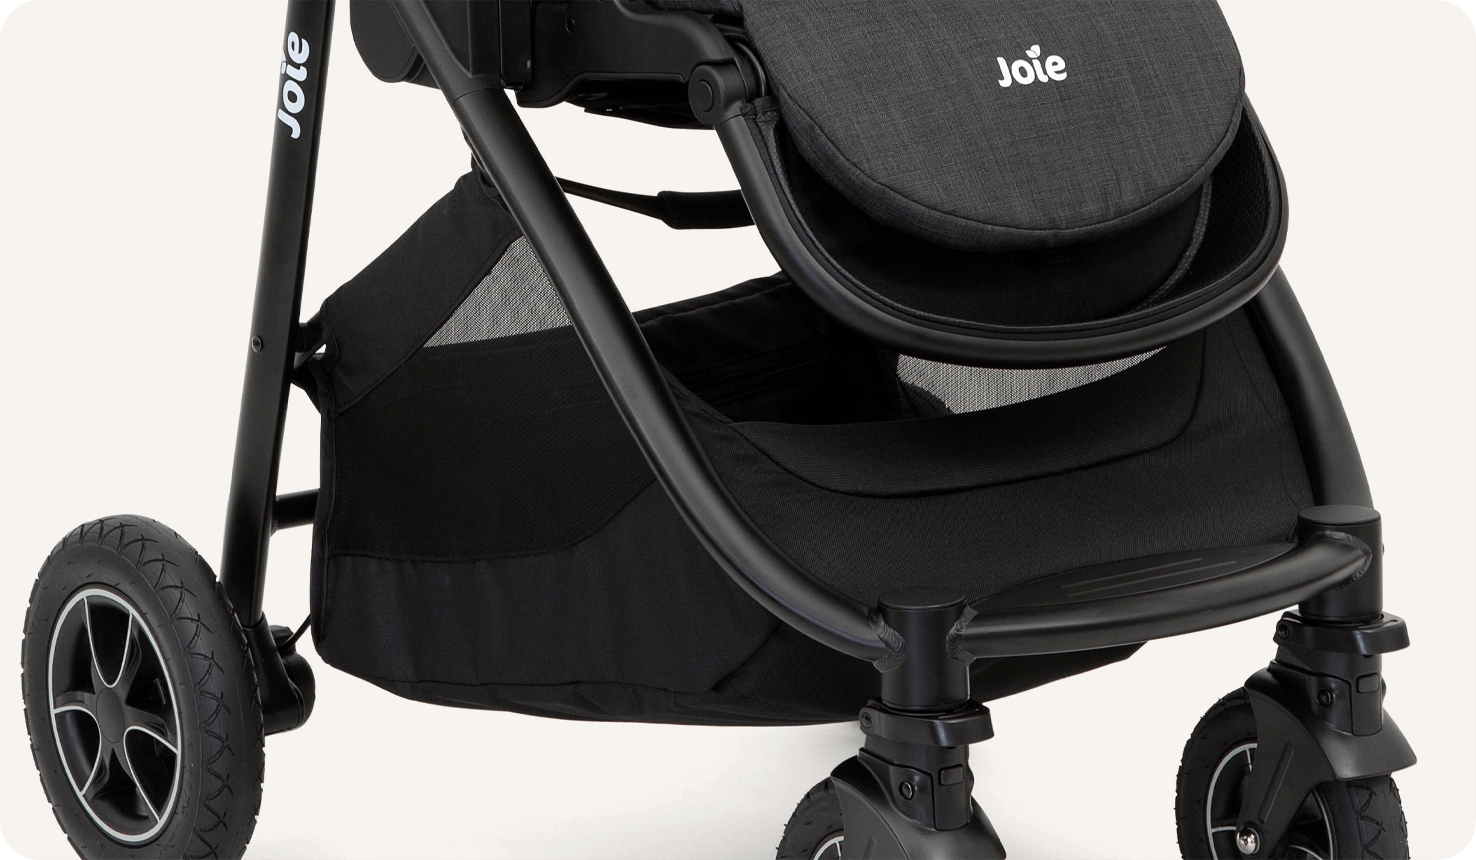 Zoomed in view of the storage basket on a Joie versatrax pram.